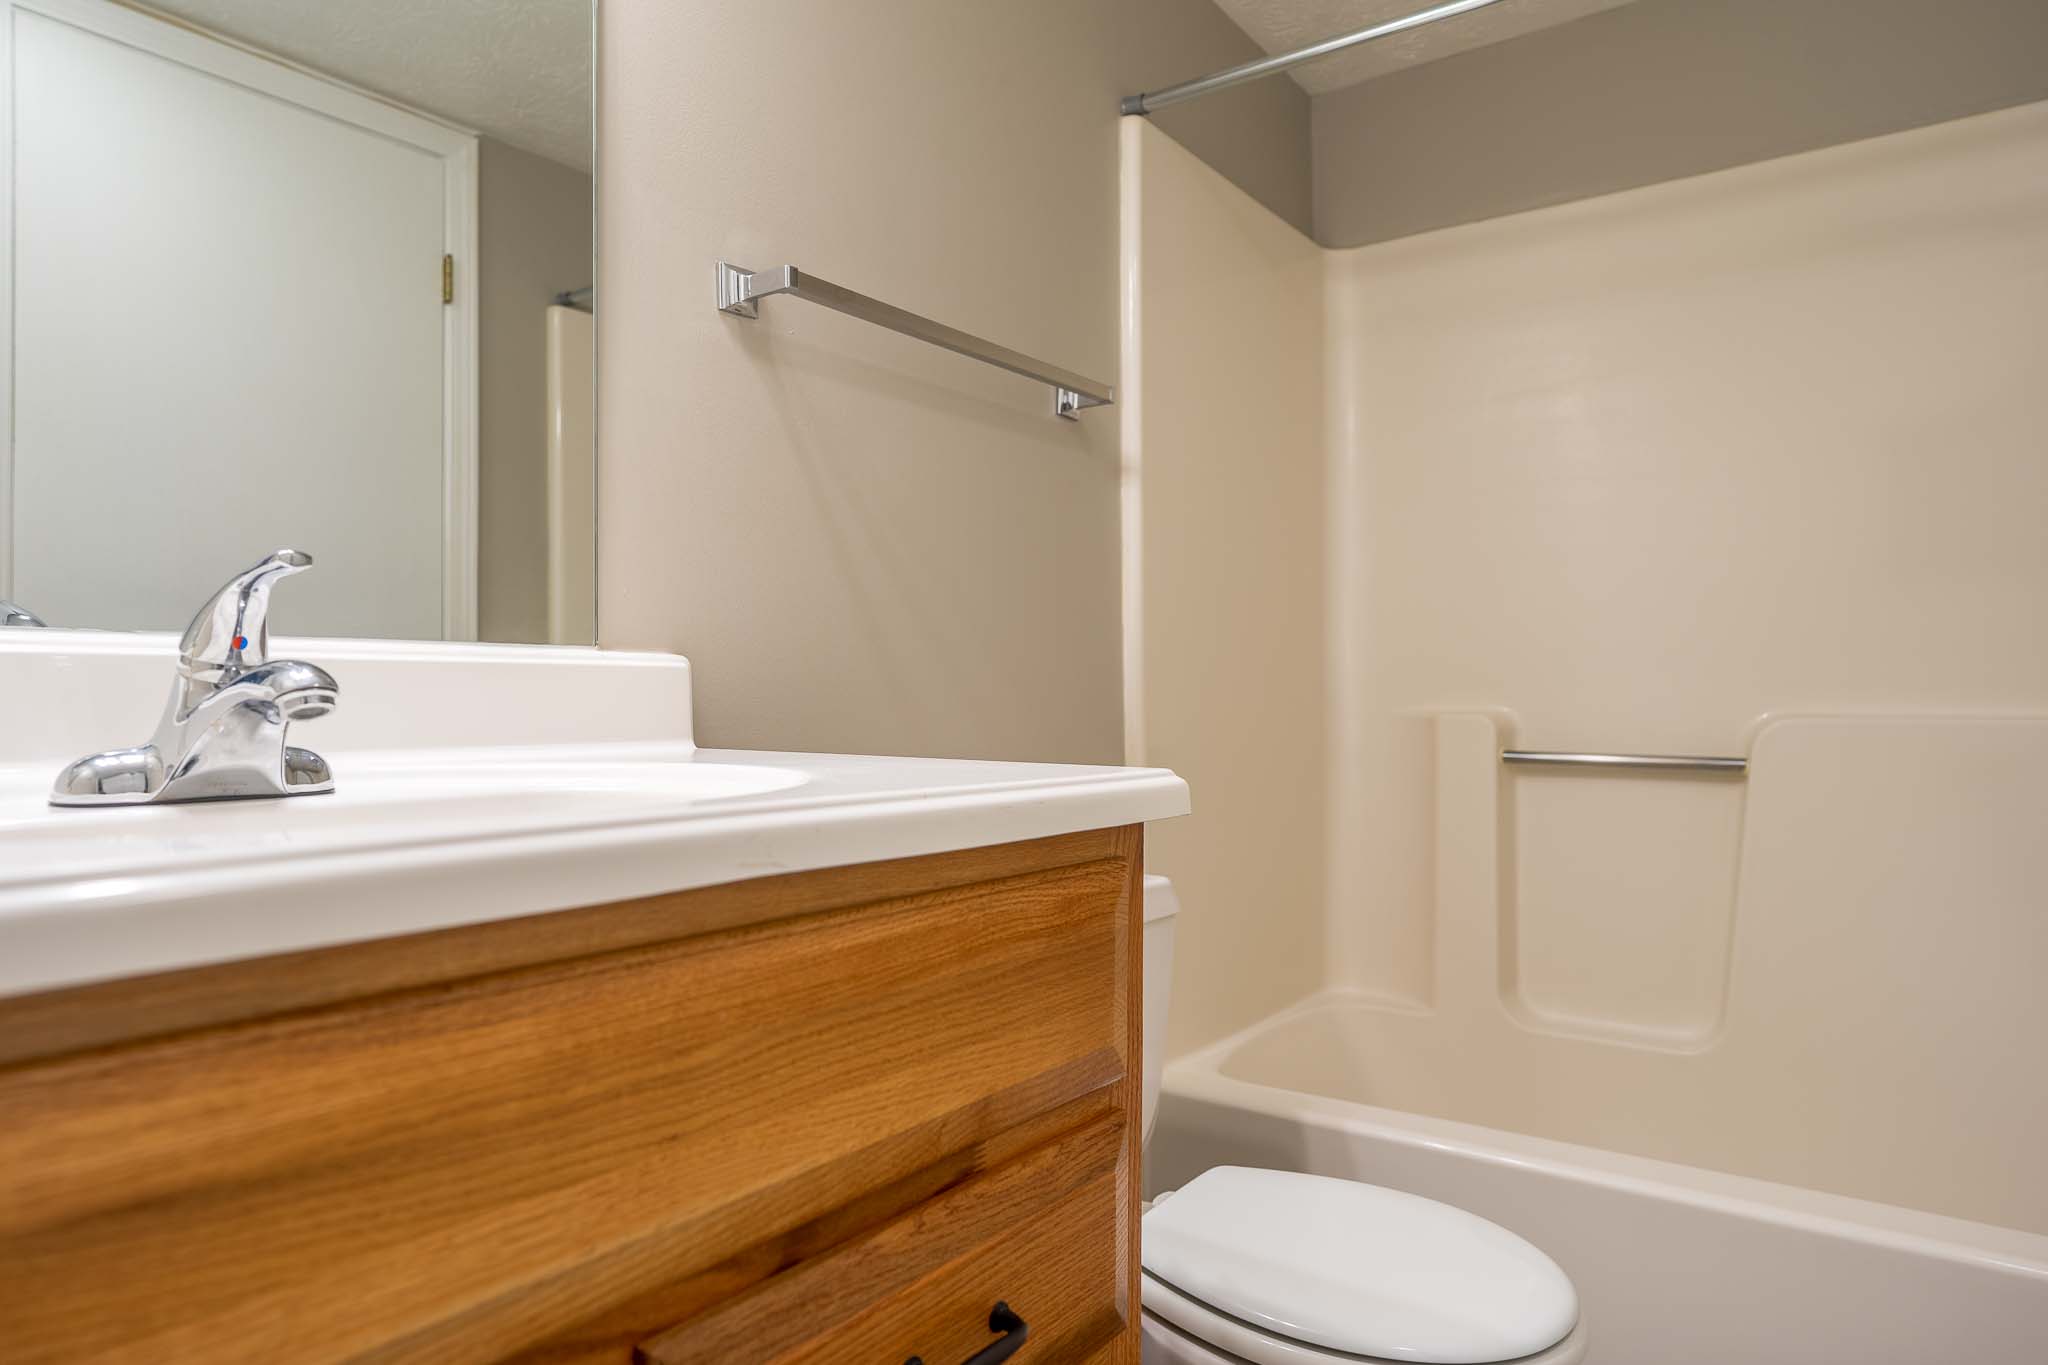 Refined Bathroom at Village Walk Apartments in Webster, New York 